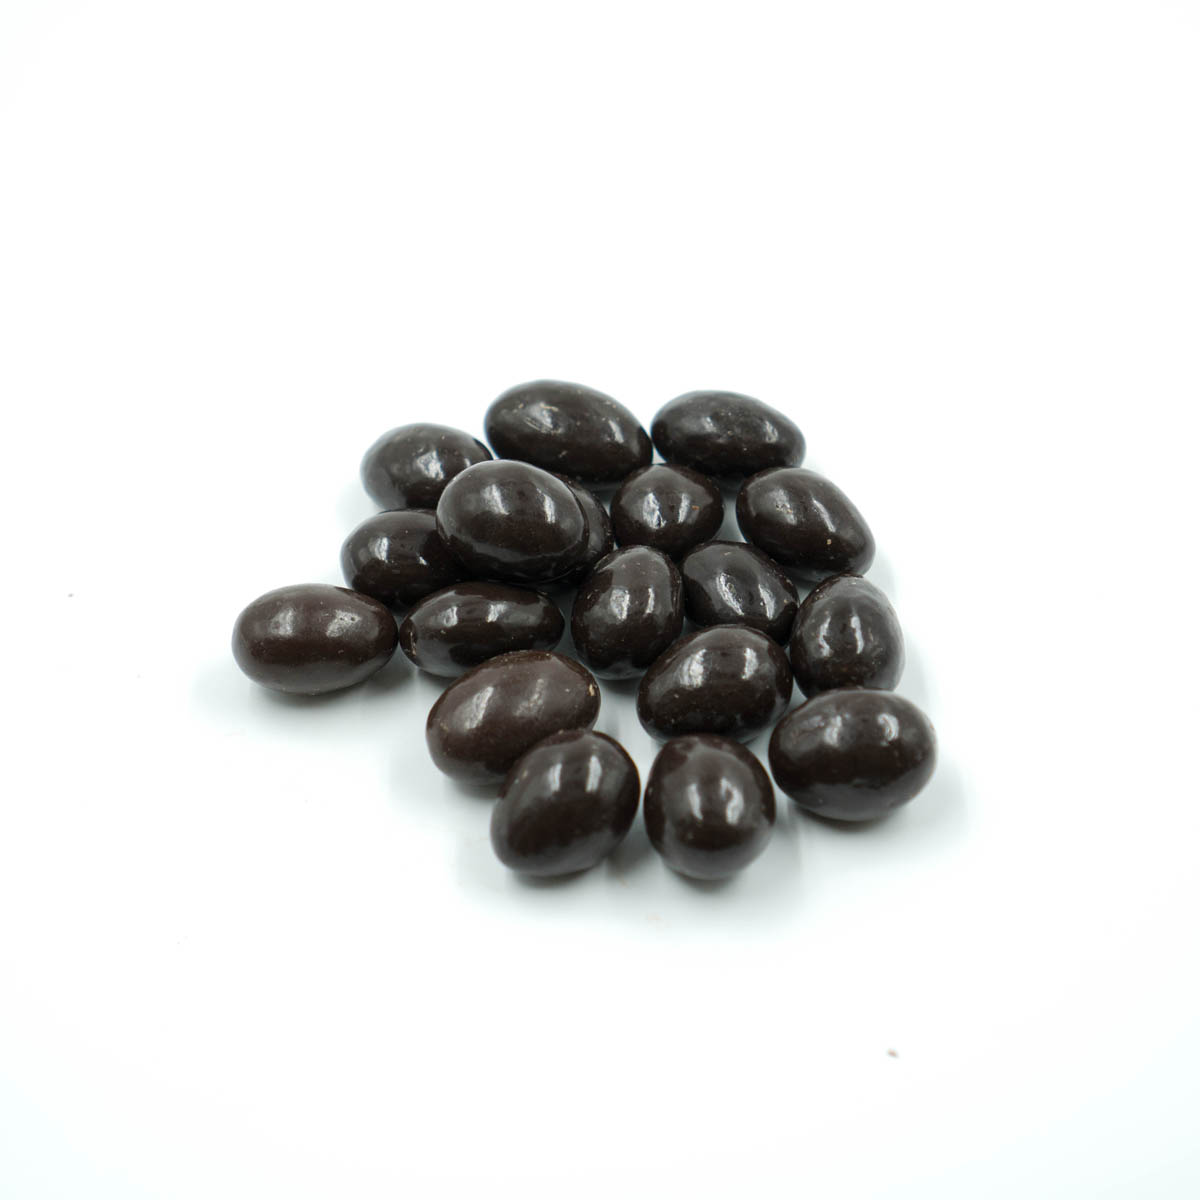 Almond coated with dark chocolate